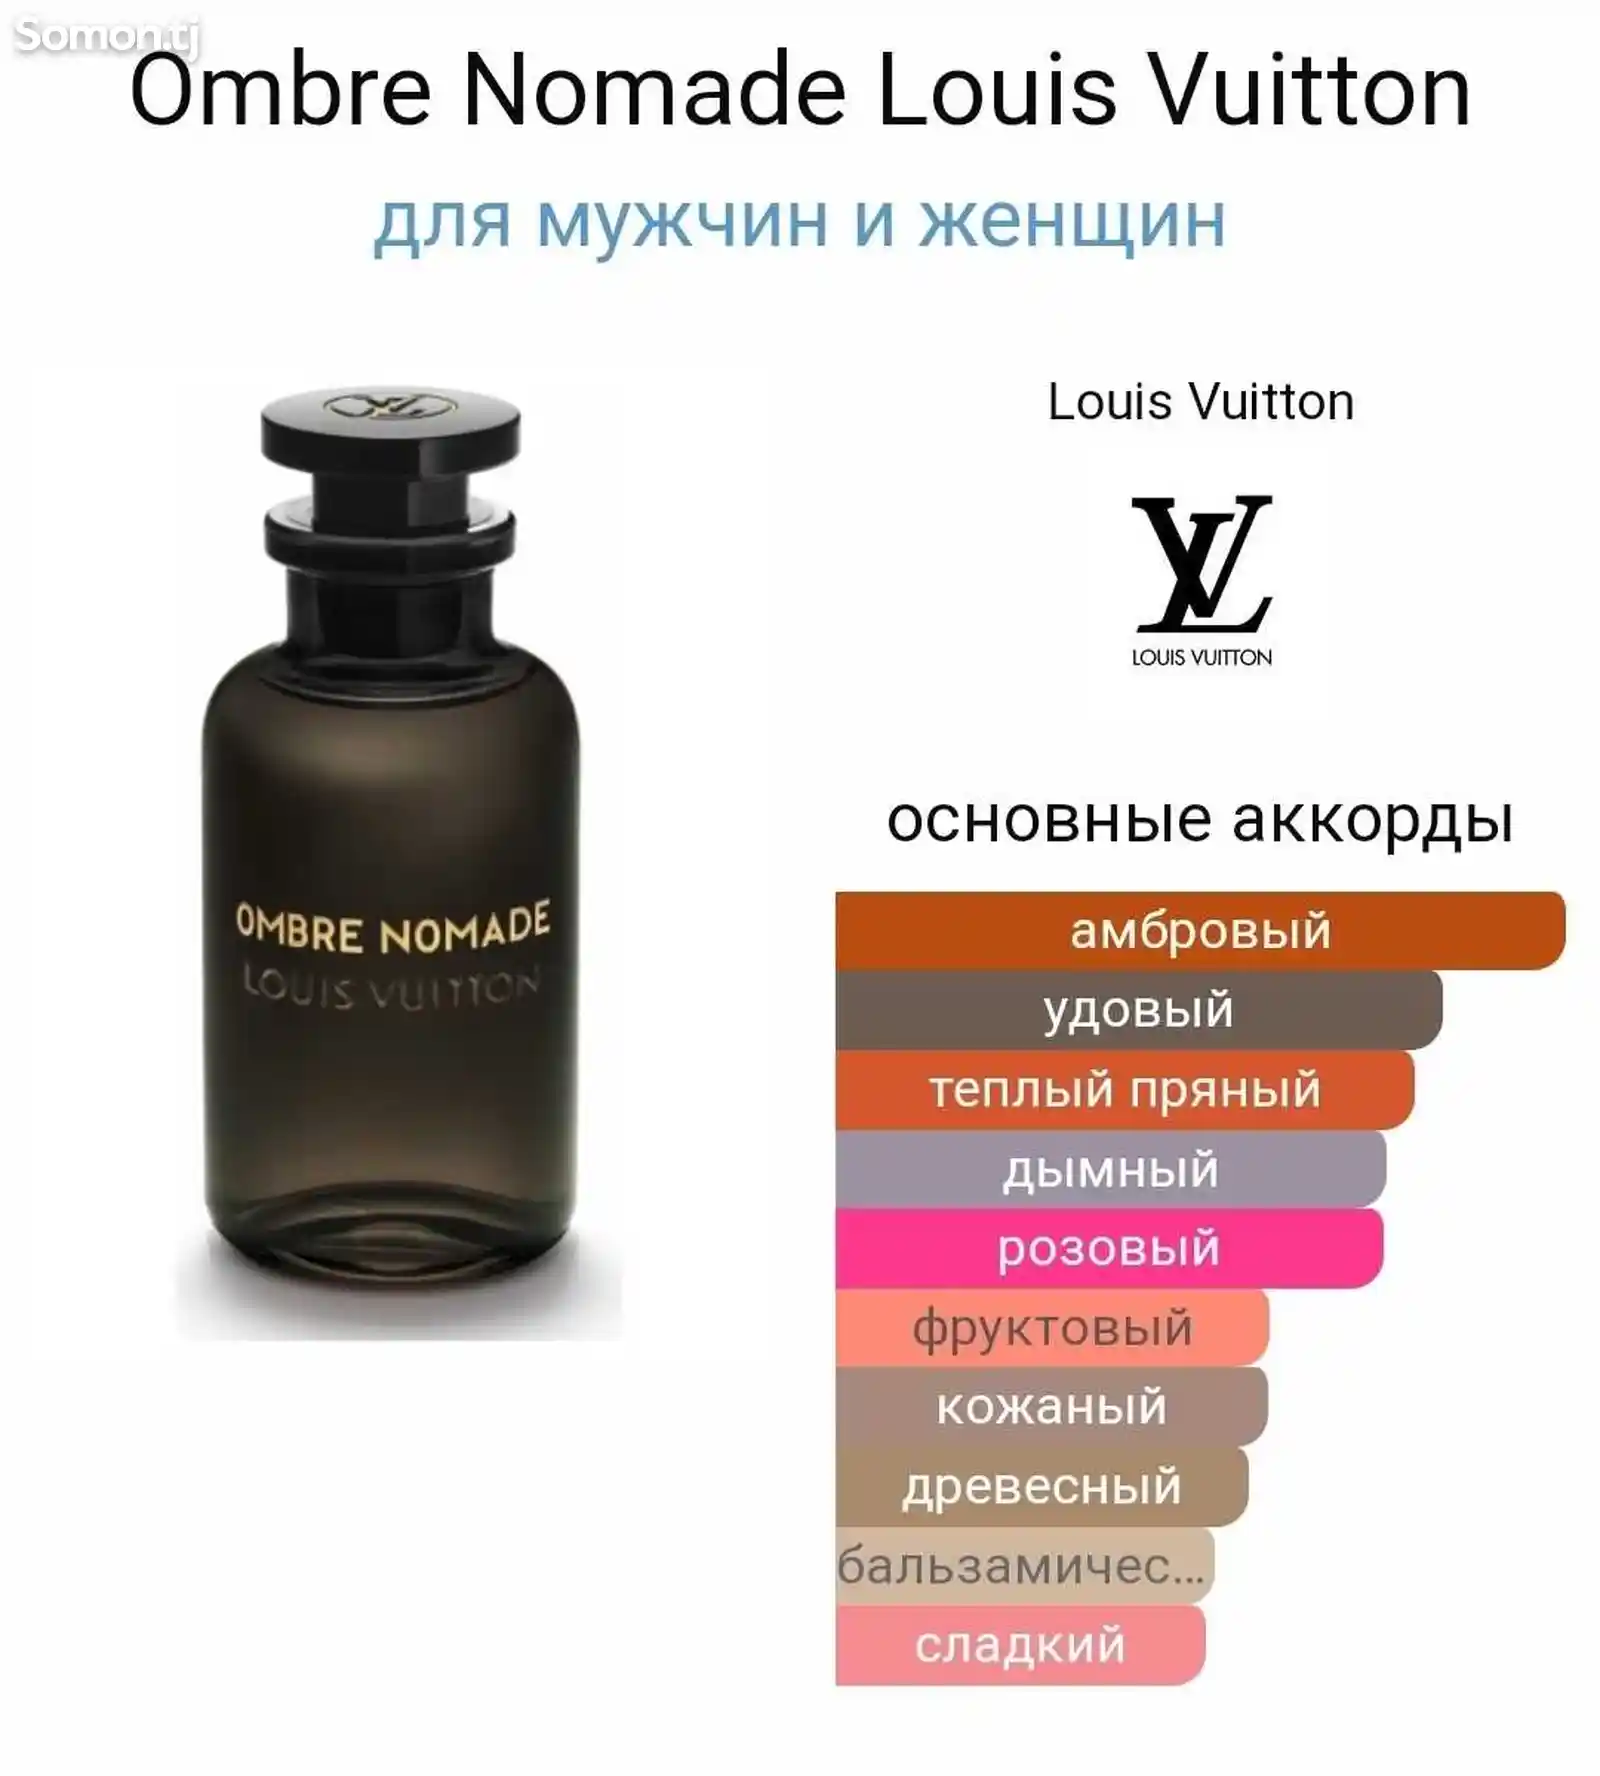 Парфюм Luis Vuitton ombre nomade-3